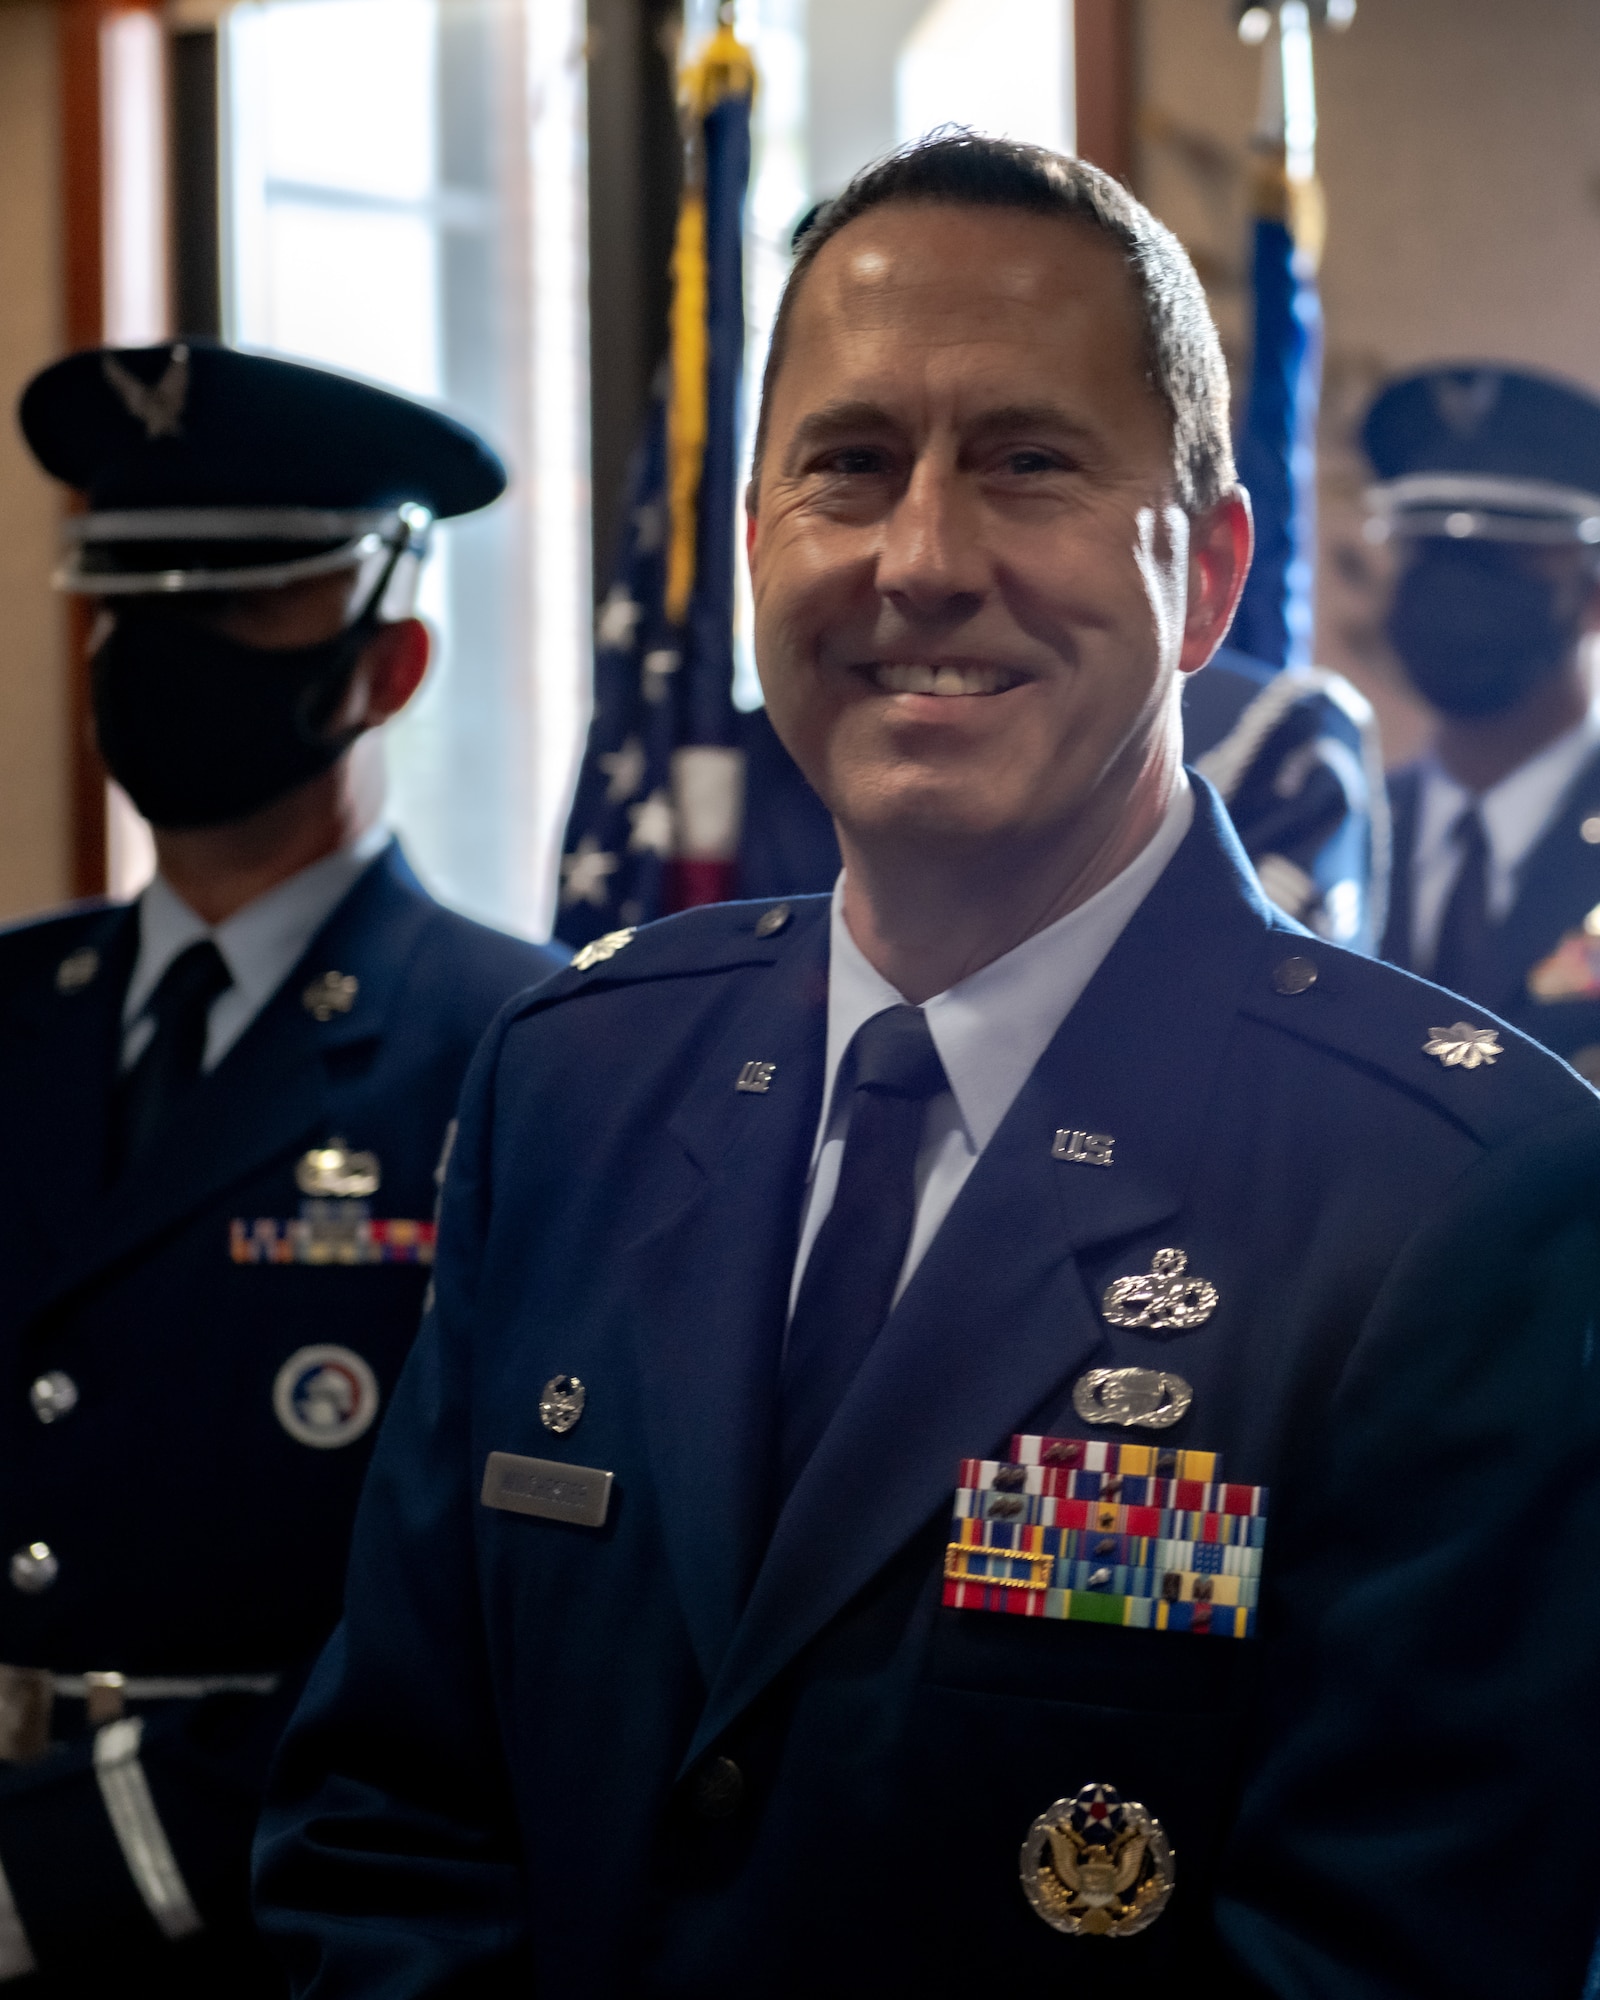 Lt. Col. Joe Winchester, the 910th Maintenance Group commander, gets into position to begin his assumption of command ceremony, Sept. 12, 2020, at Youngstown Air Reserve Station. Winchester replaced the outgoing commander, Col. Sharon Johnson.